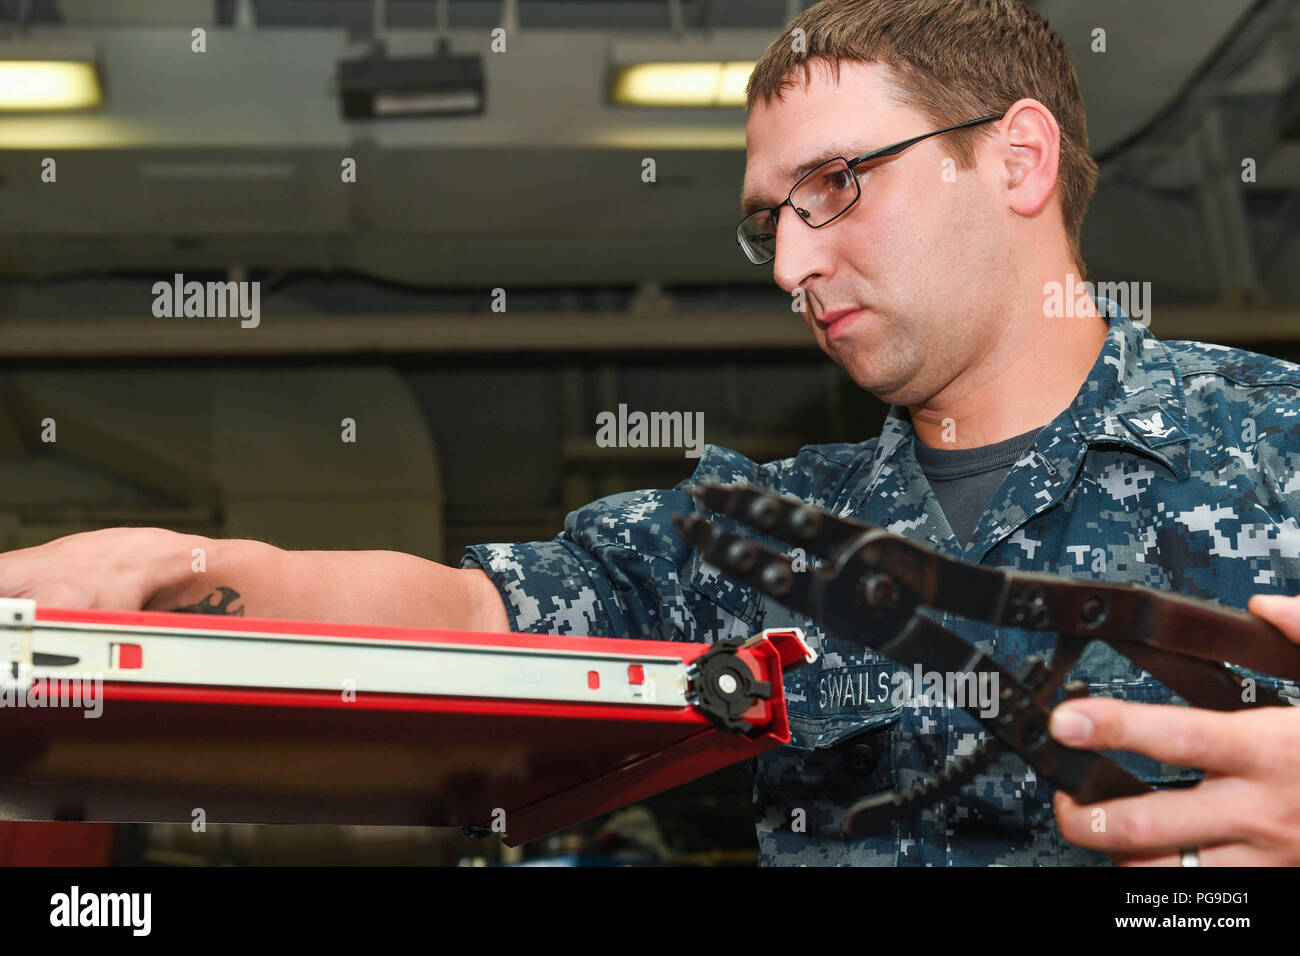 180823-N-MK318-0026 NORFOLK, Va. (Aug. 23, 2018) Aviation Machinist's Mate 3rd Class Palmer Swails organizes tools in a jet shop aboard the Nimitz-class aircraft carrier USS Harry S. Truman (CVN 75). Harry S. Truman is currently moored at Naval Station Norfolk after returning from a regularly scheduled deployment. (U.S. Navy photo by Mass Communication Specialist 3rd Class Victoria Granado/Released) Stock Photo